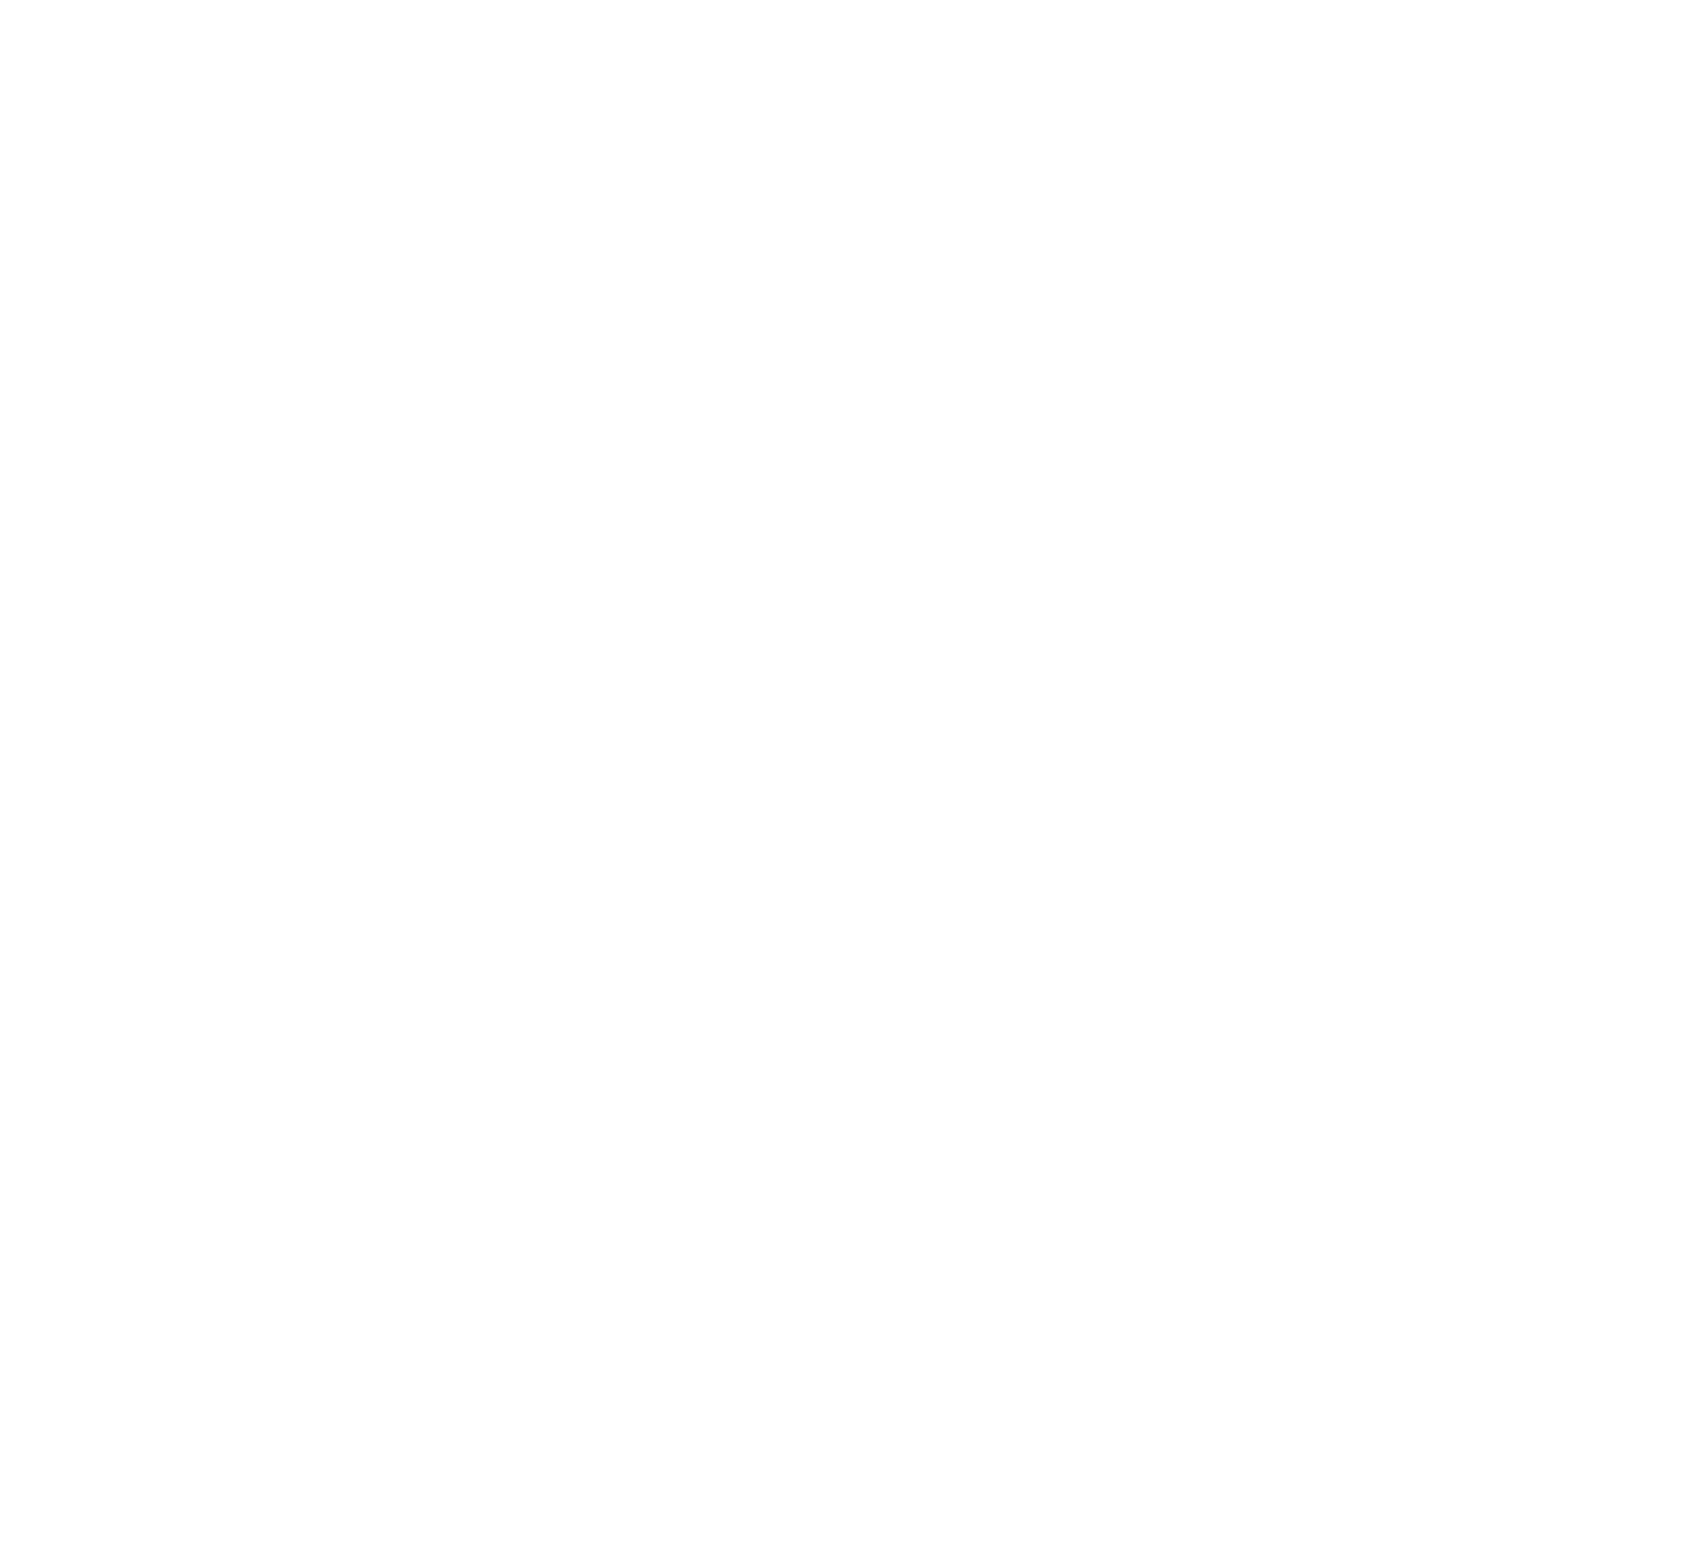 South Yorkshire Mayoral Combined Authority logo